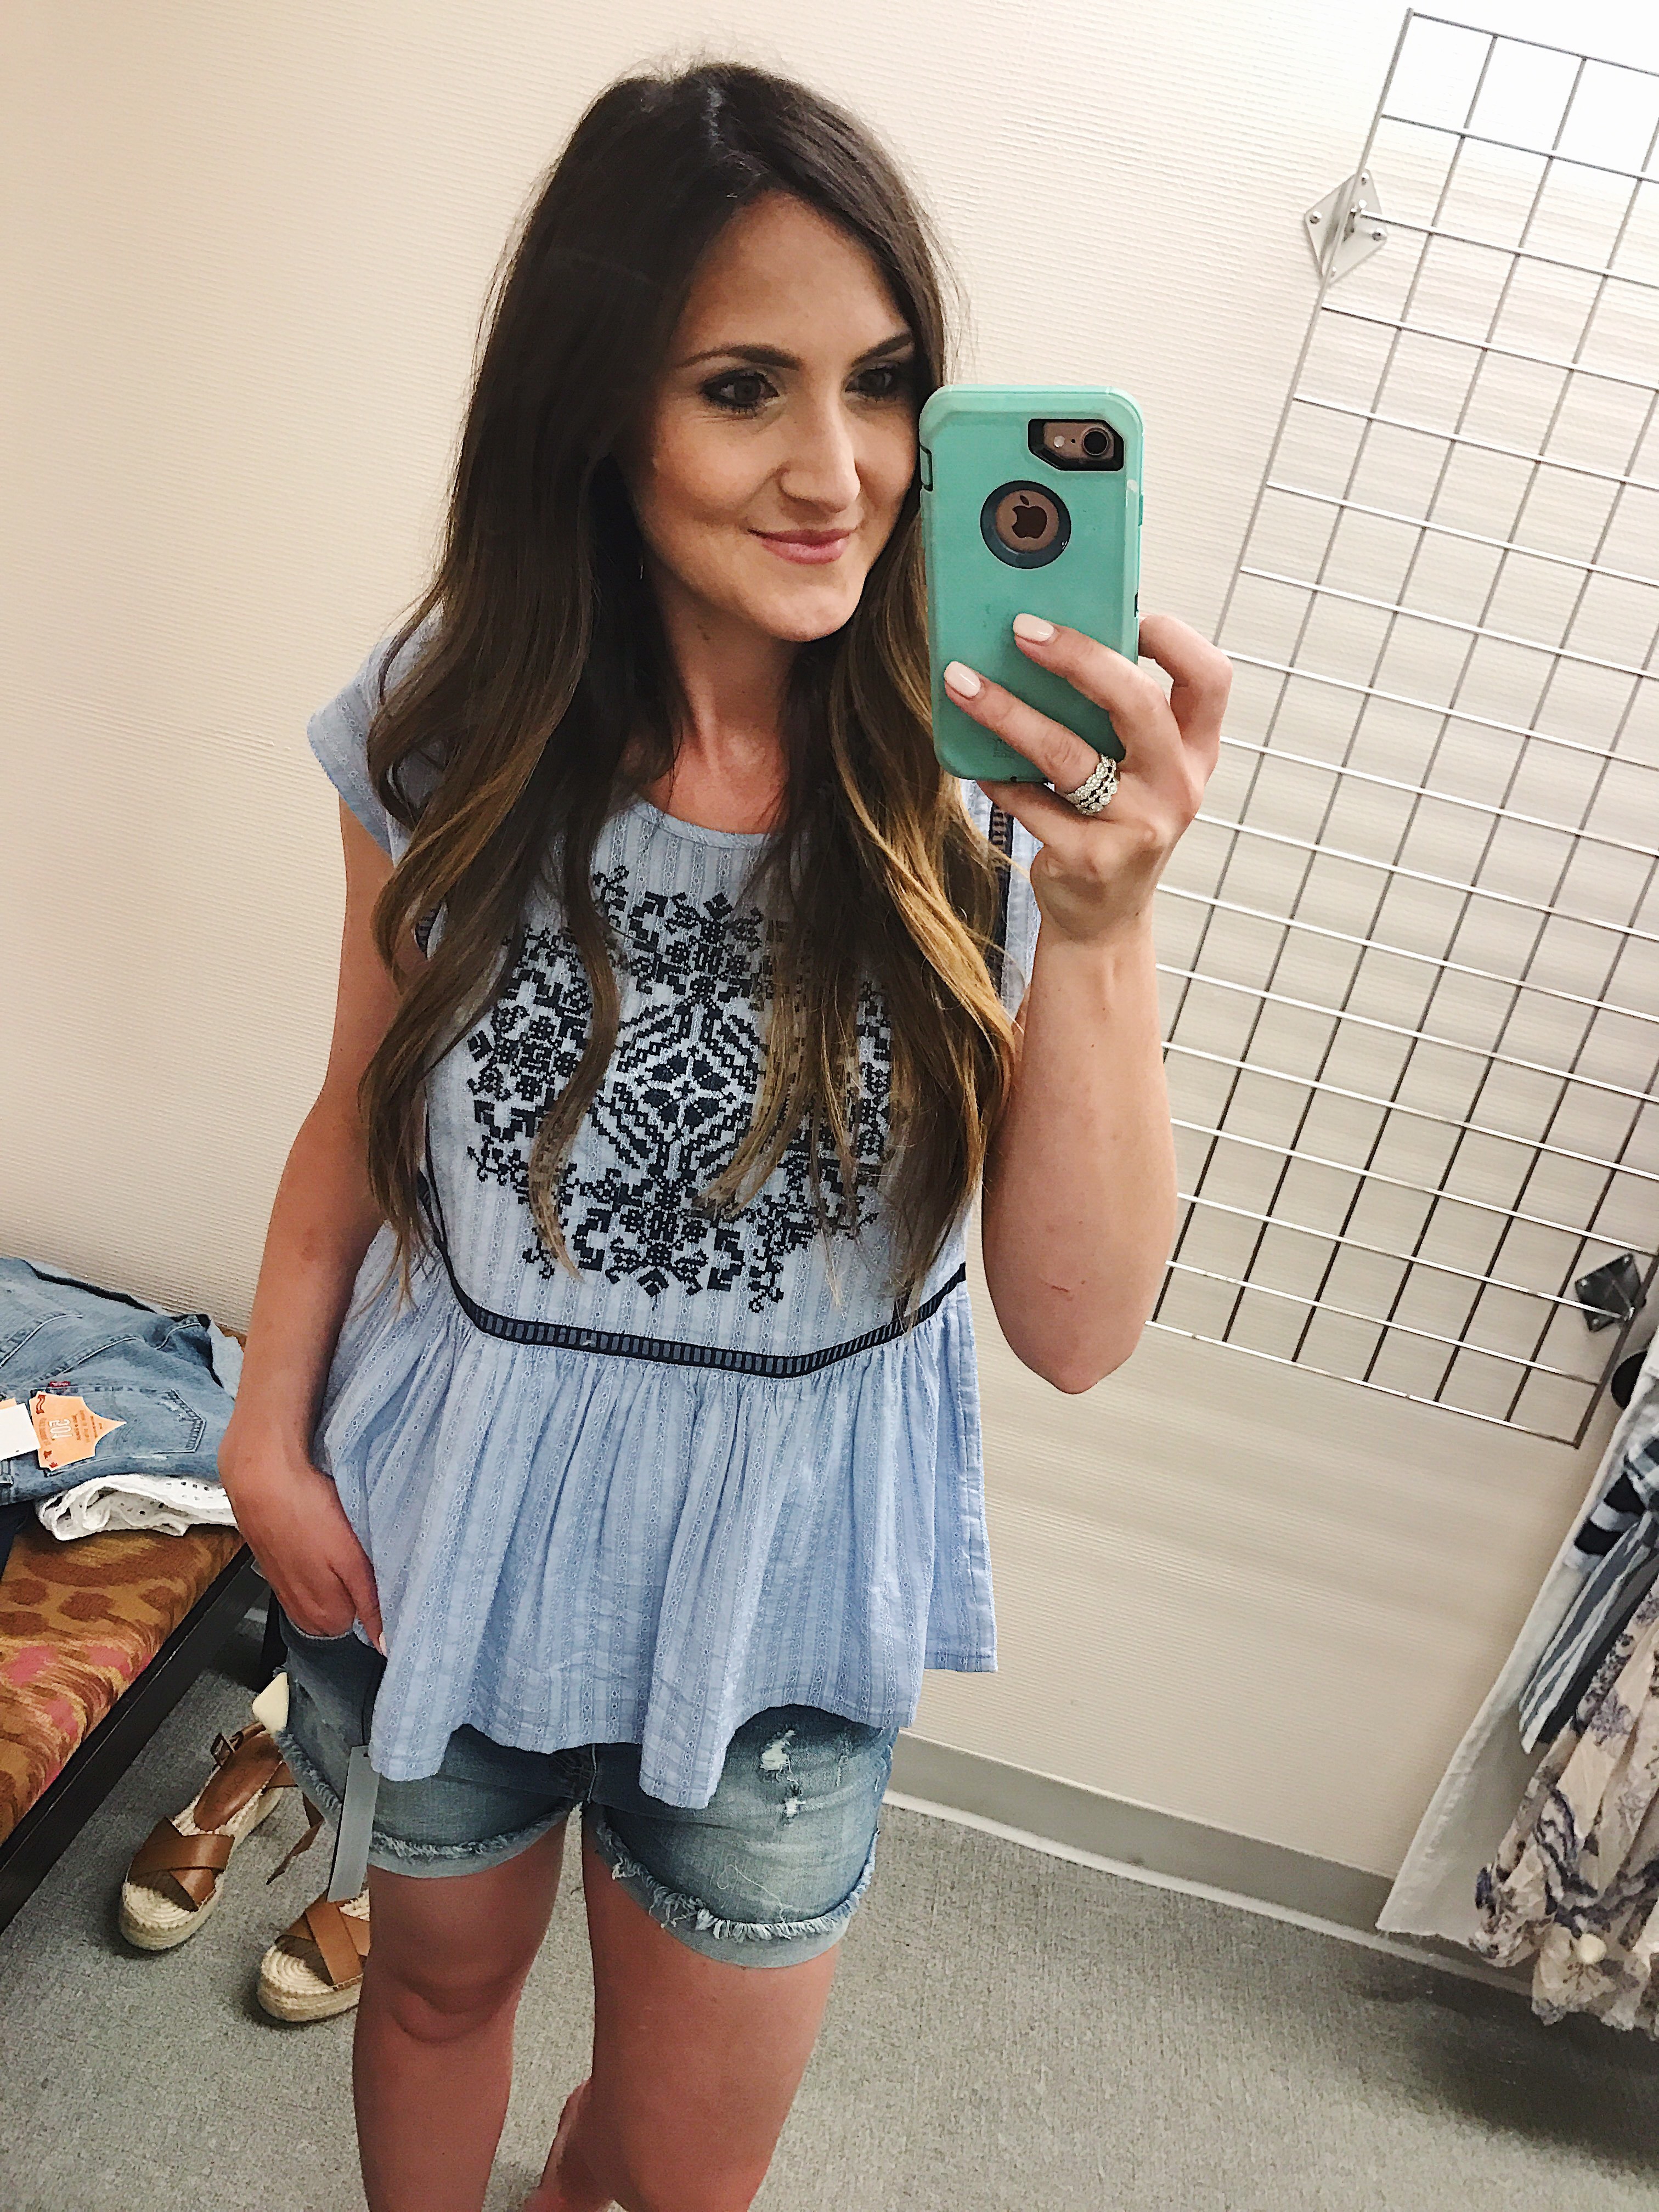 Nordstrom fit review: Tees + Tanks for Summer